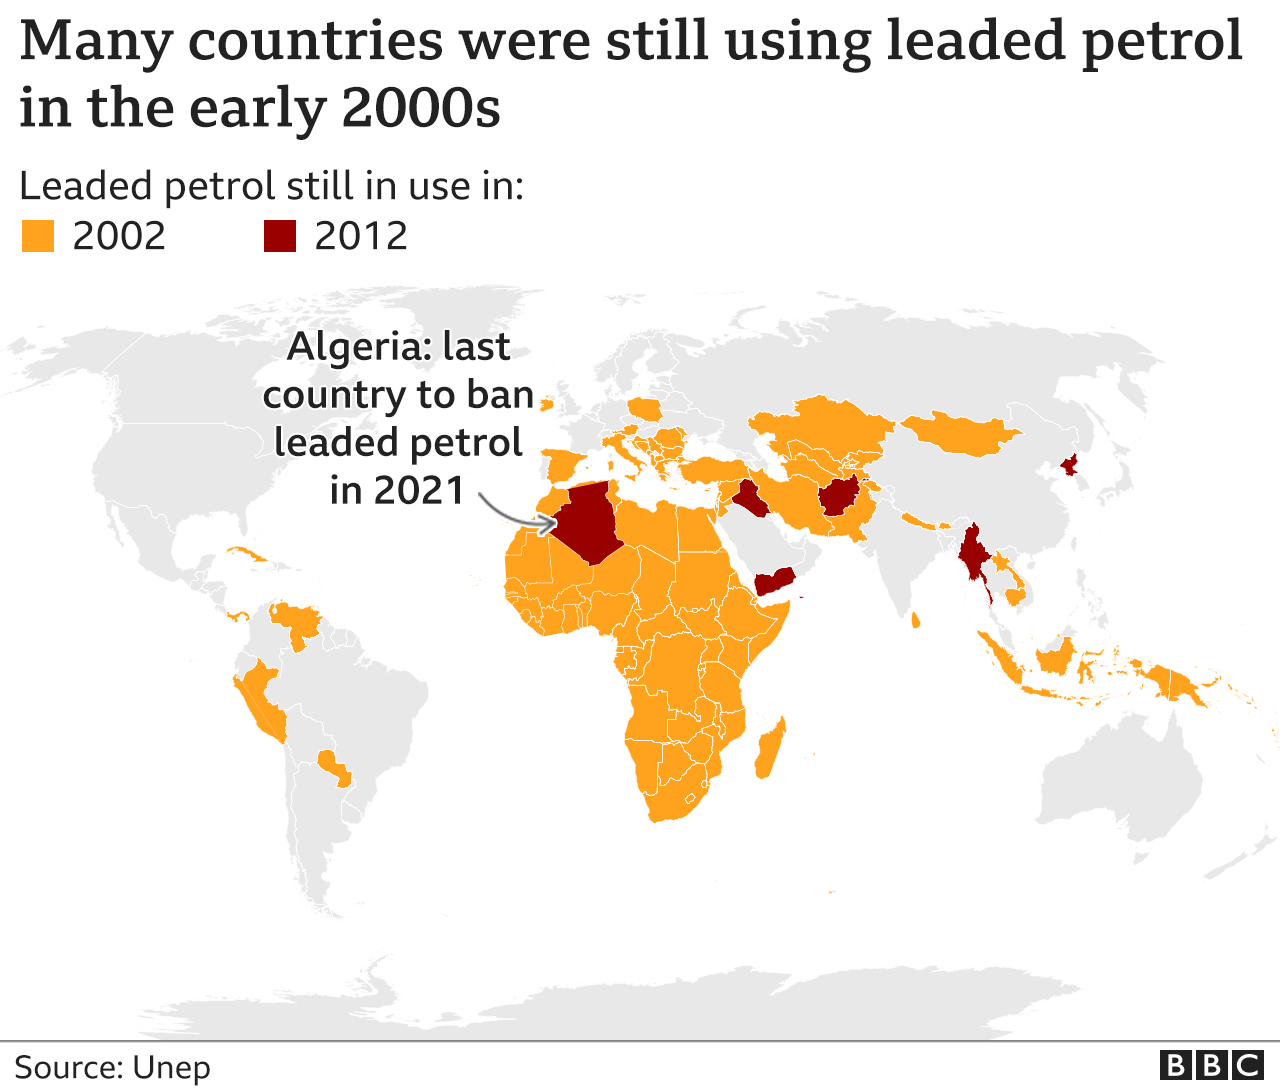 Map showing the countries where lead petrol was still available in the early 2000s.